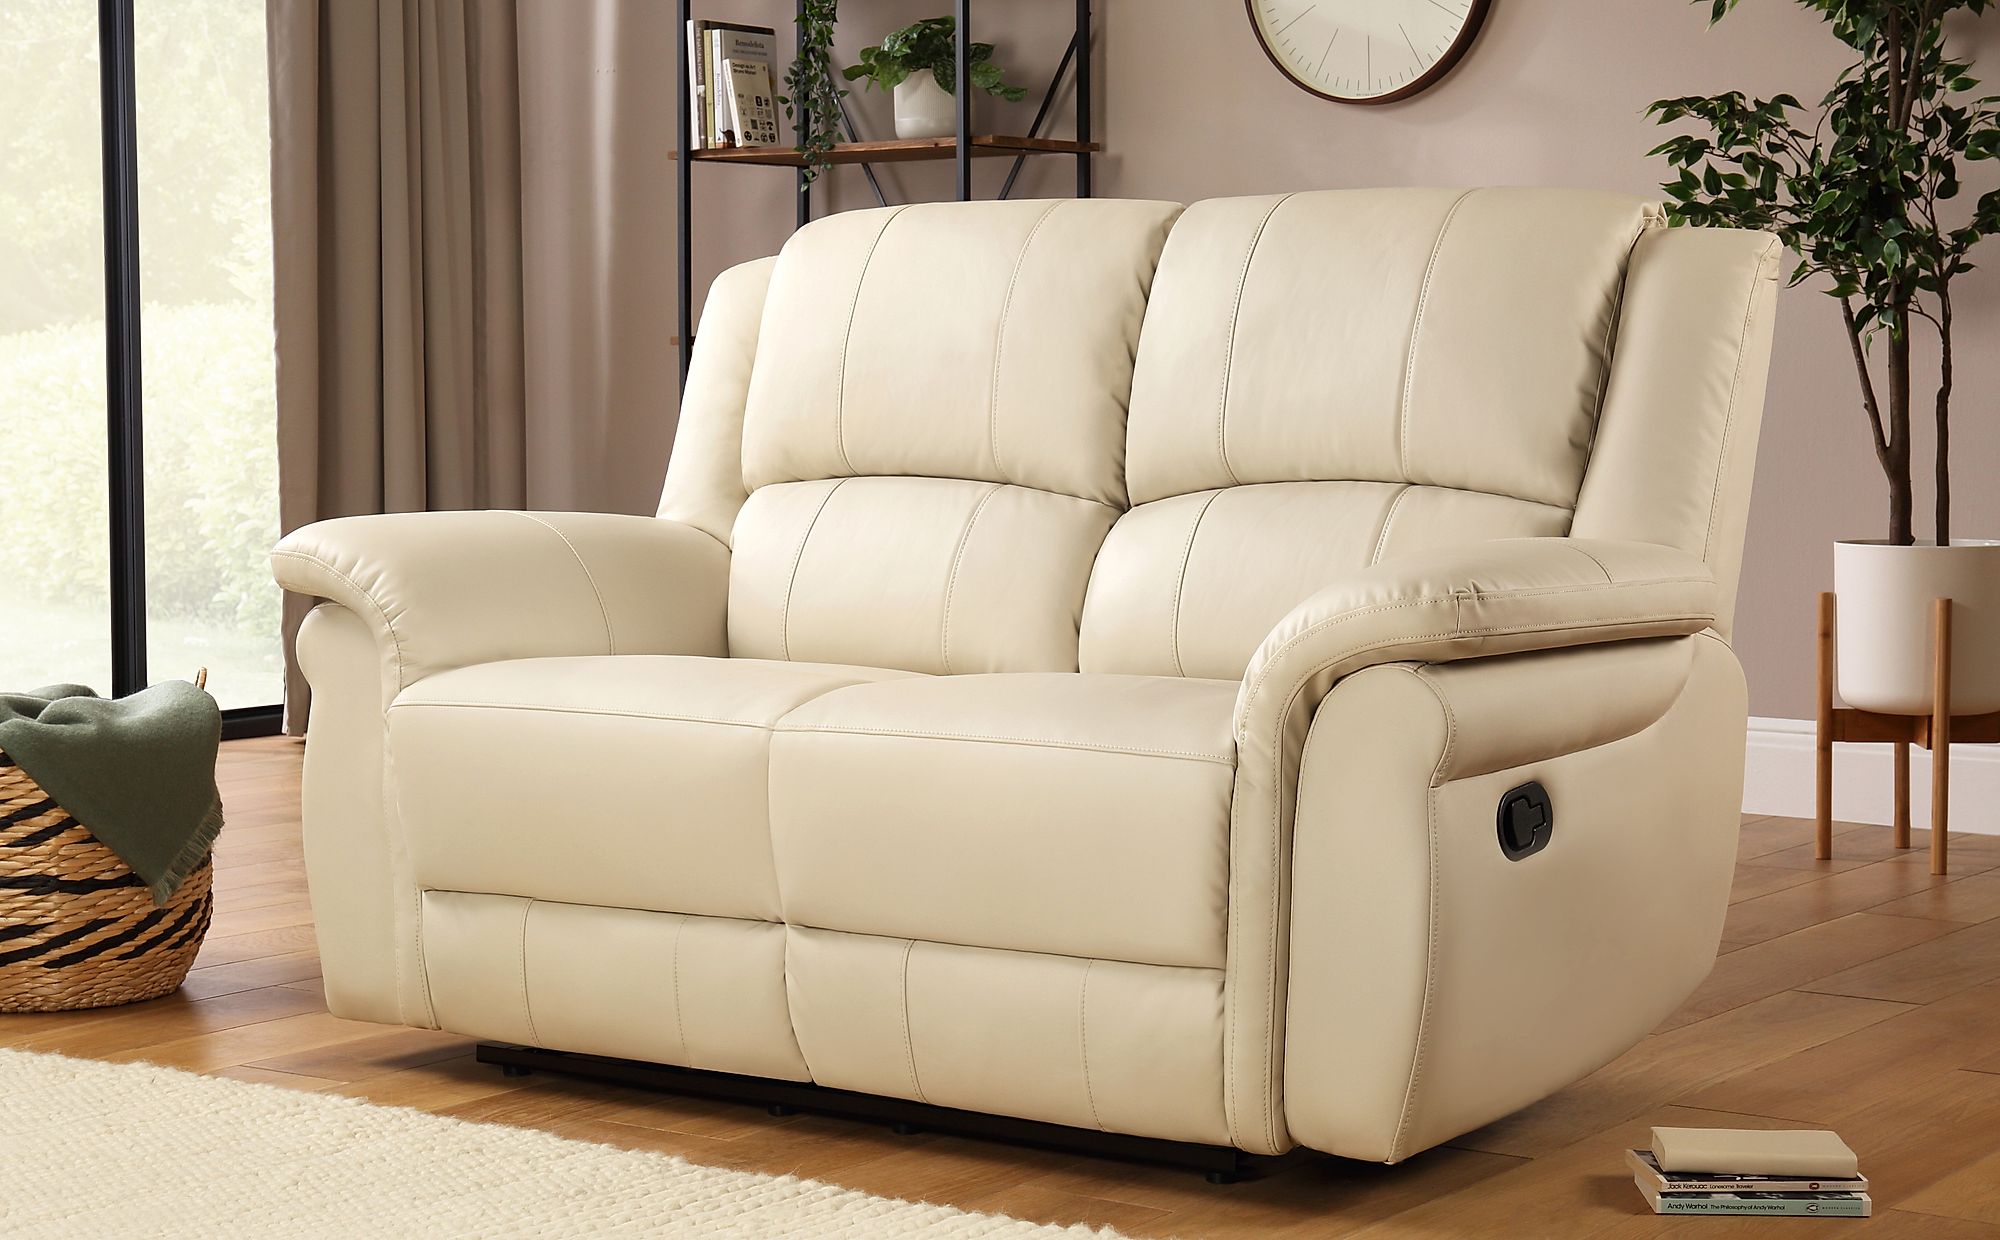 2 seater leather recliner sofa sale